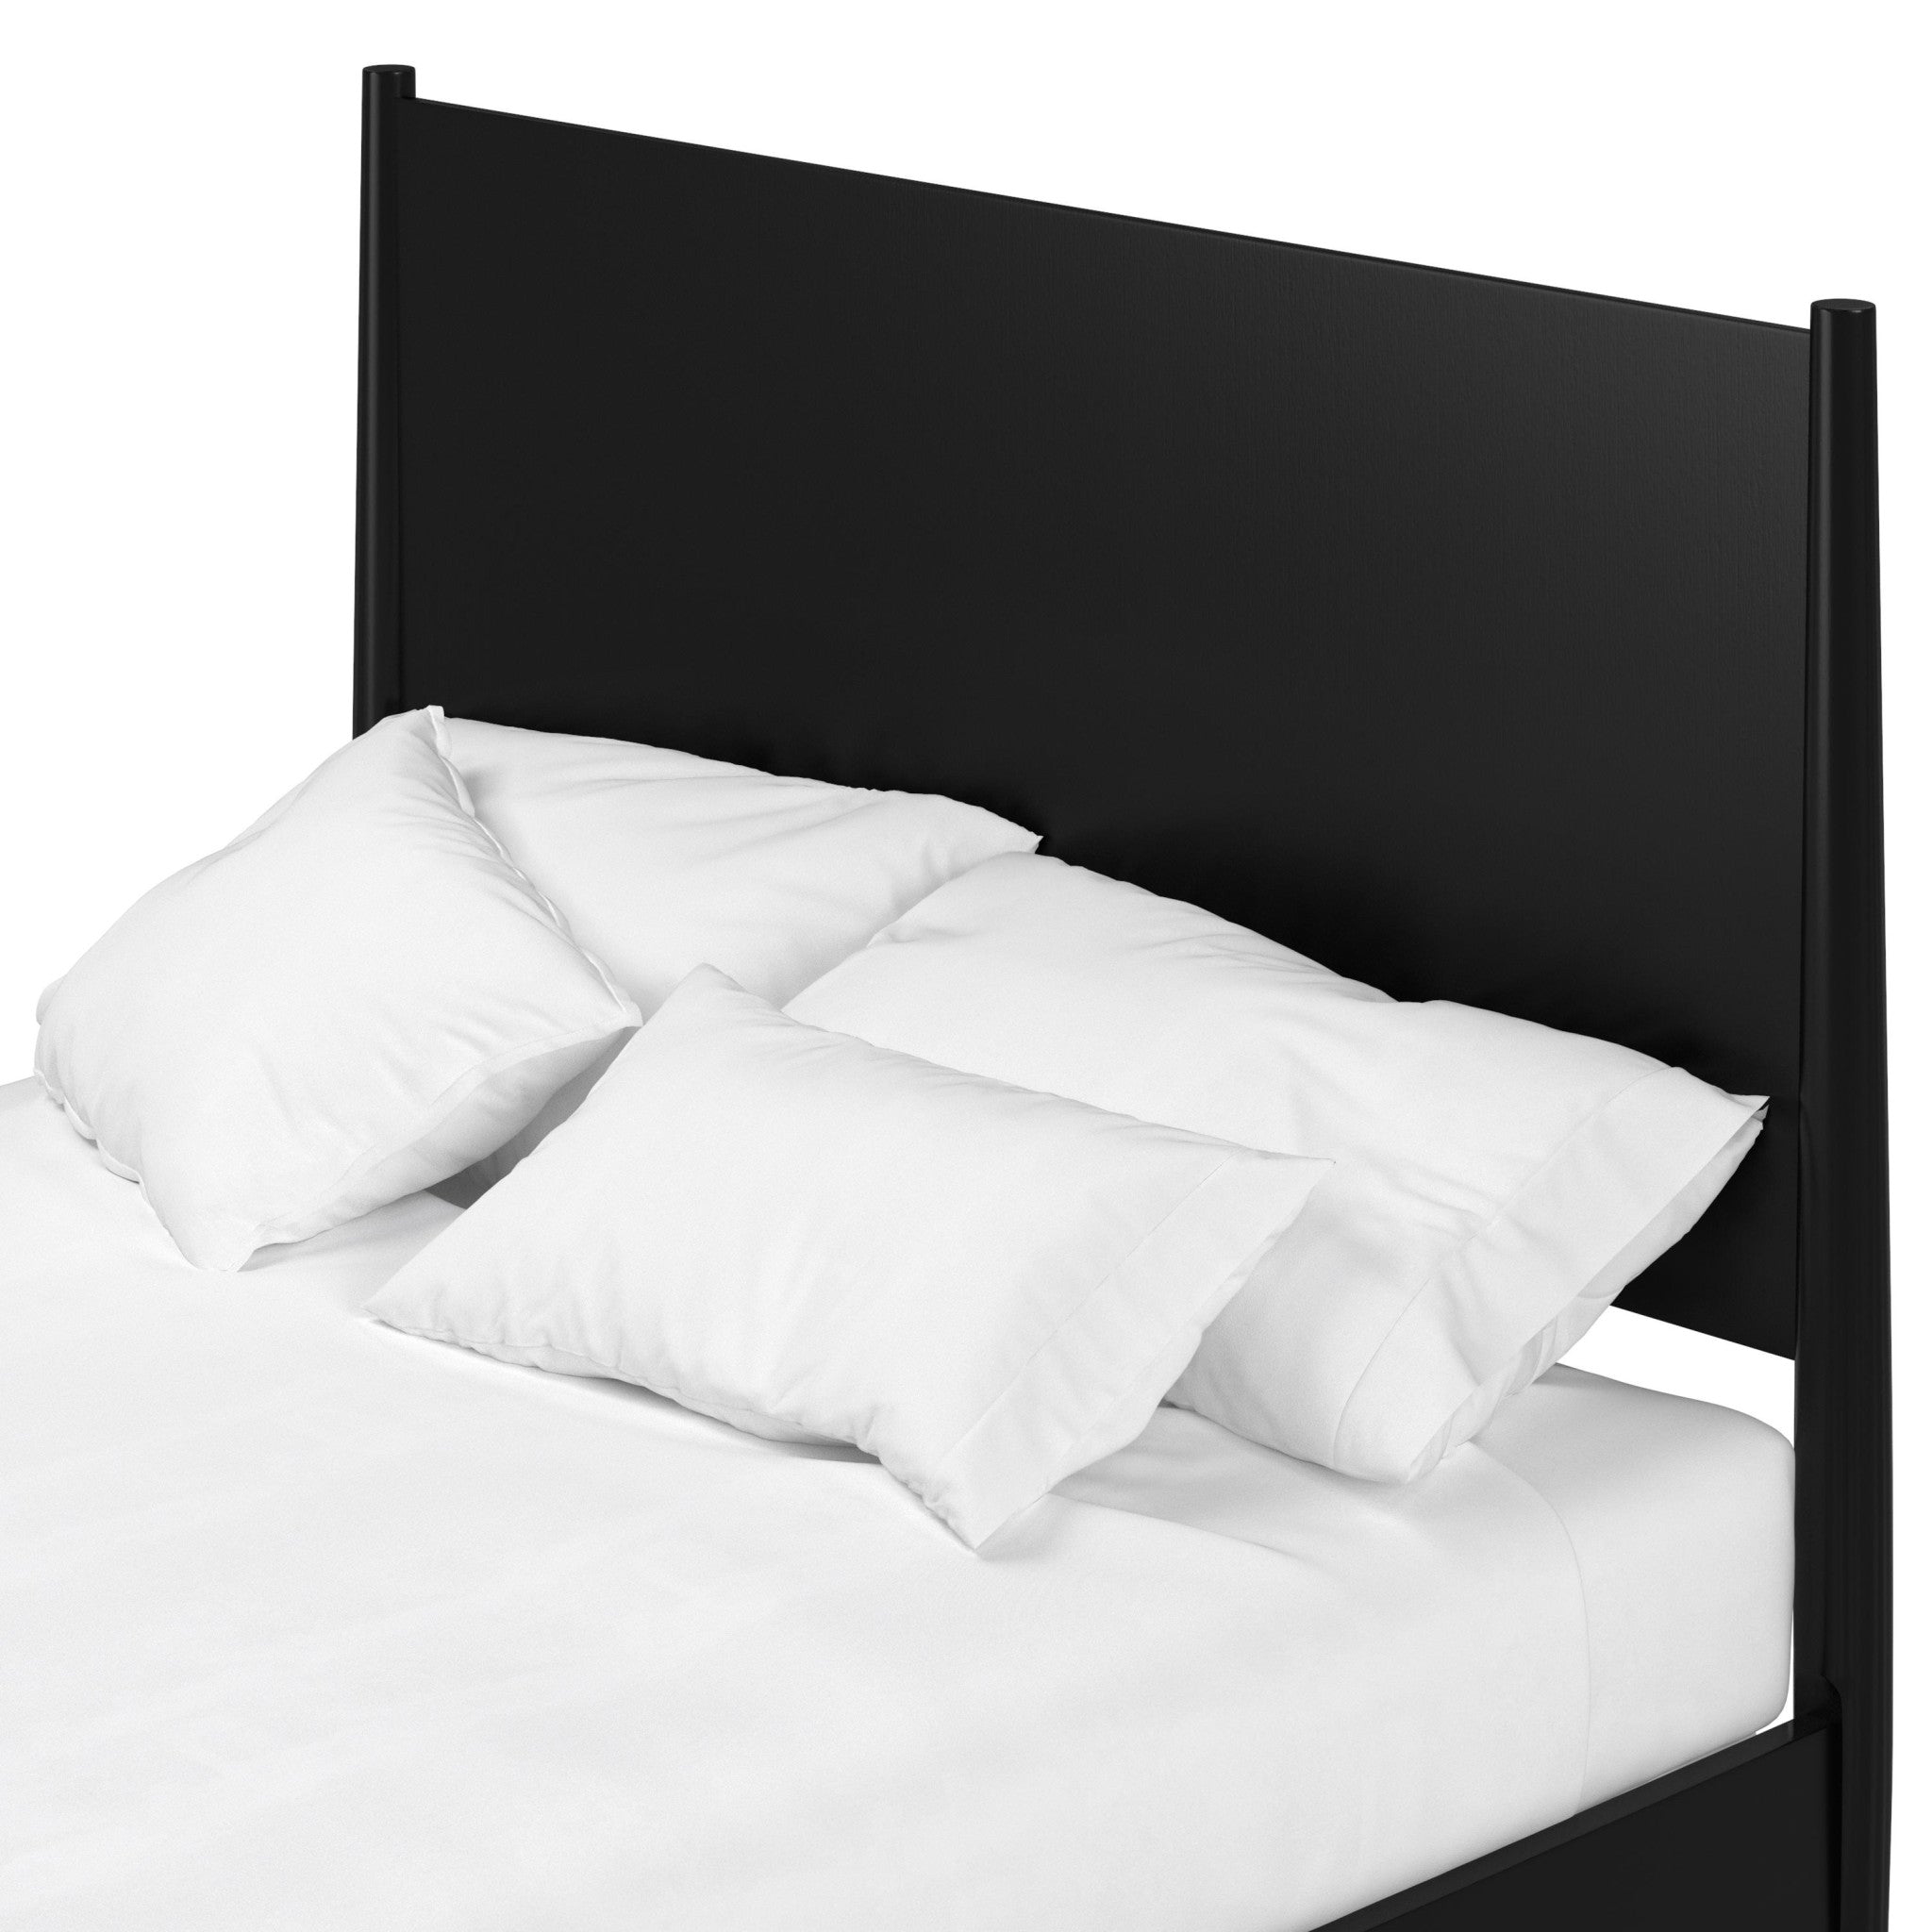 Black Solid and Manufactured Wood King Bed